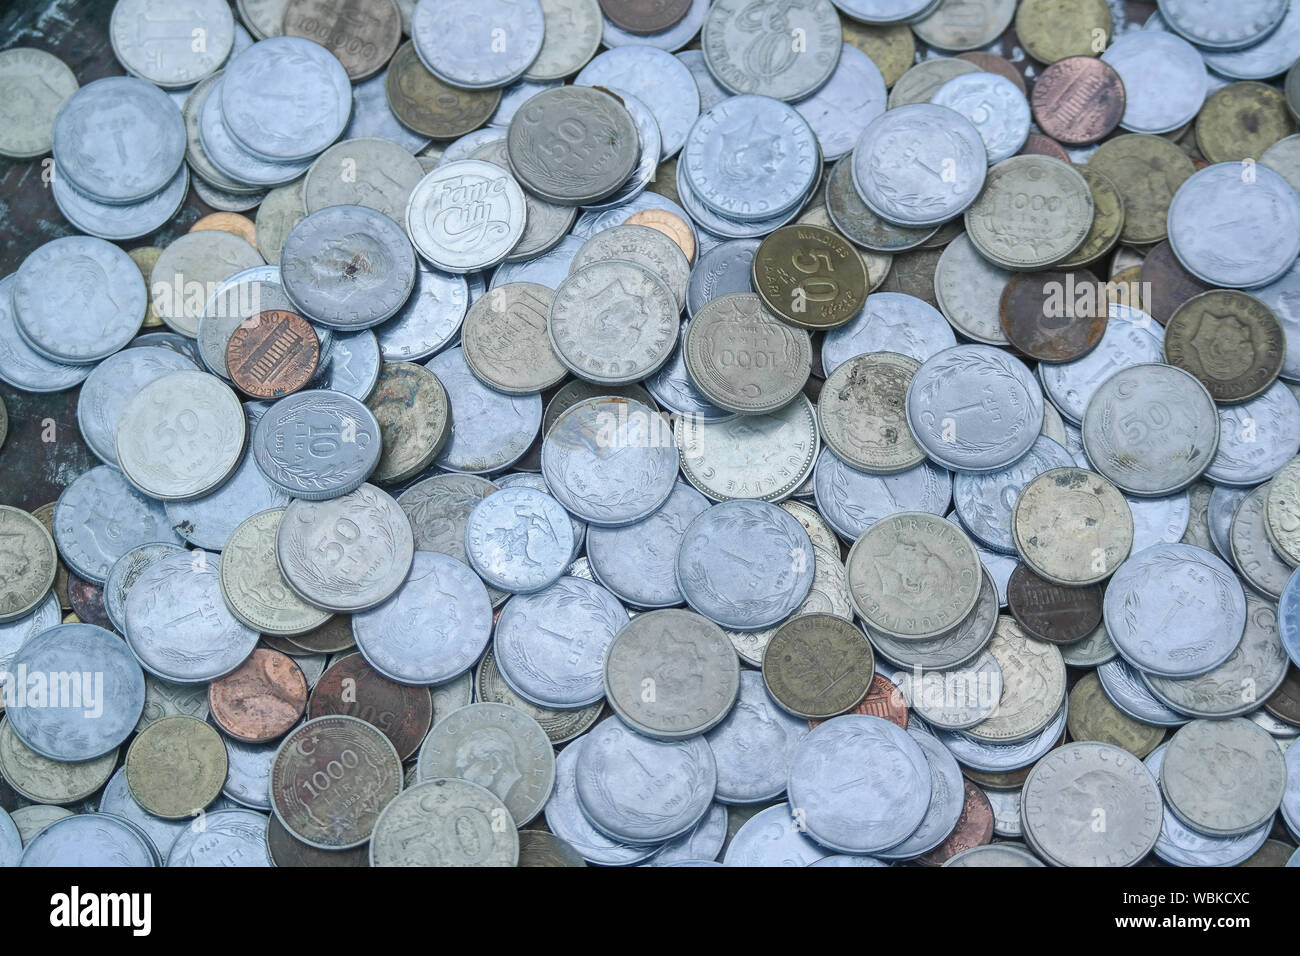 Old Turkish money at the antique shop in Istanbul, Turkey. Stock Photo